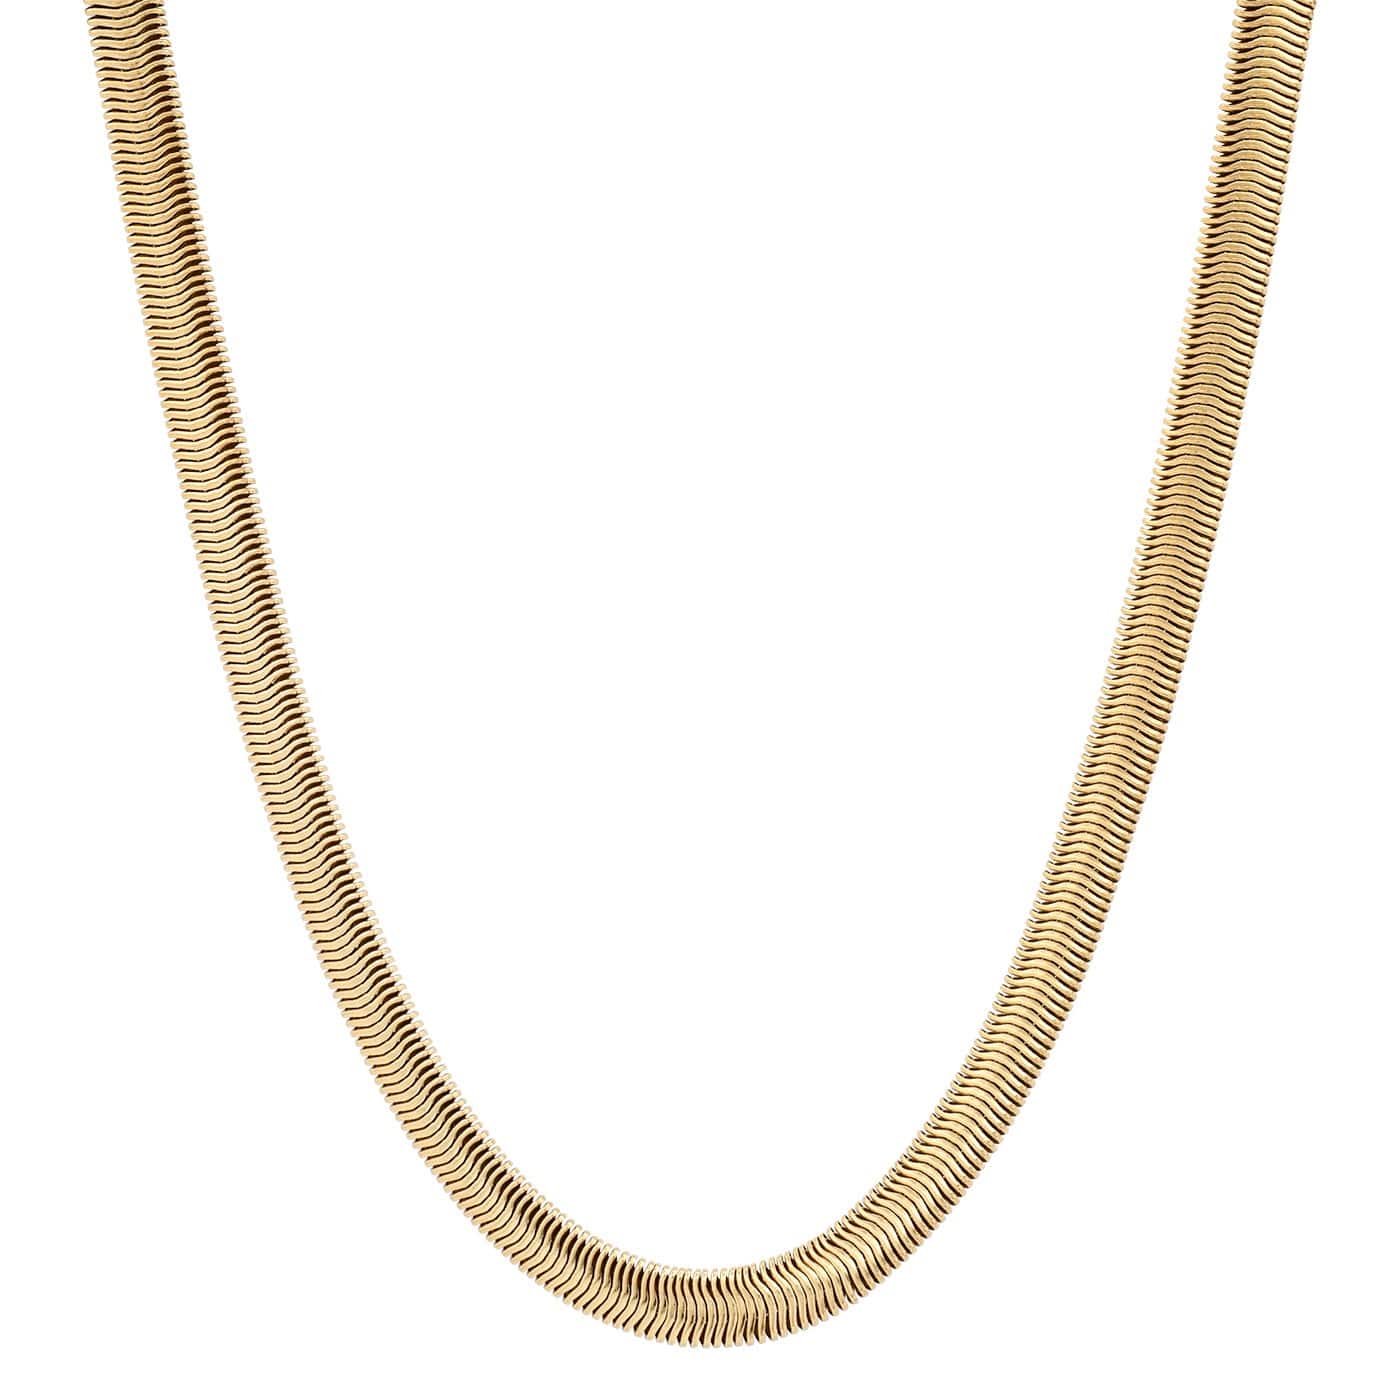 NKL-GPL Thick Gold Plated Herringbone Chain Necklace